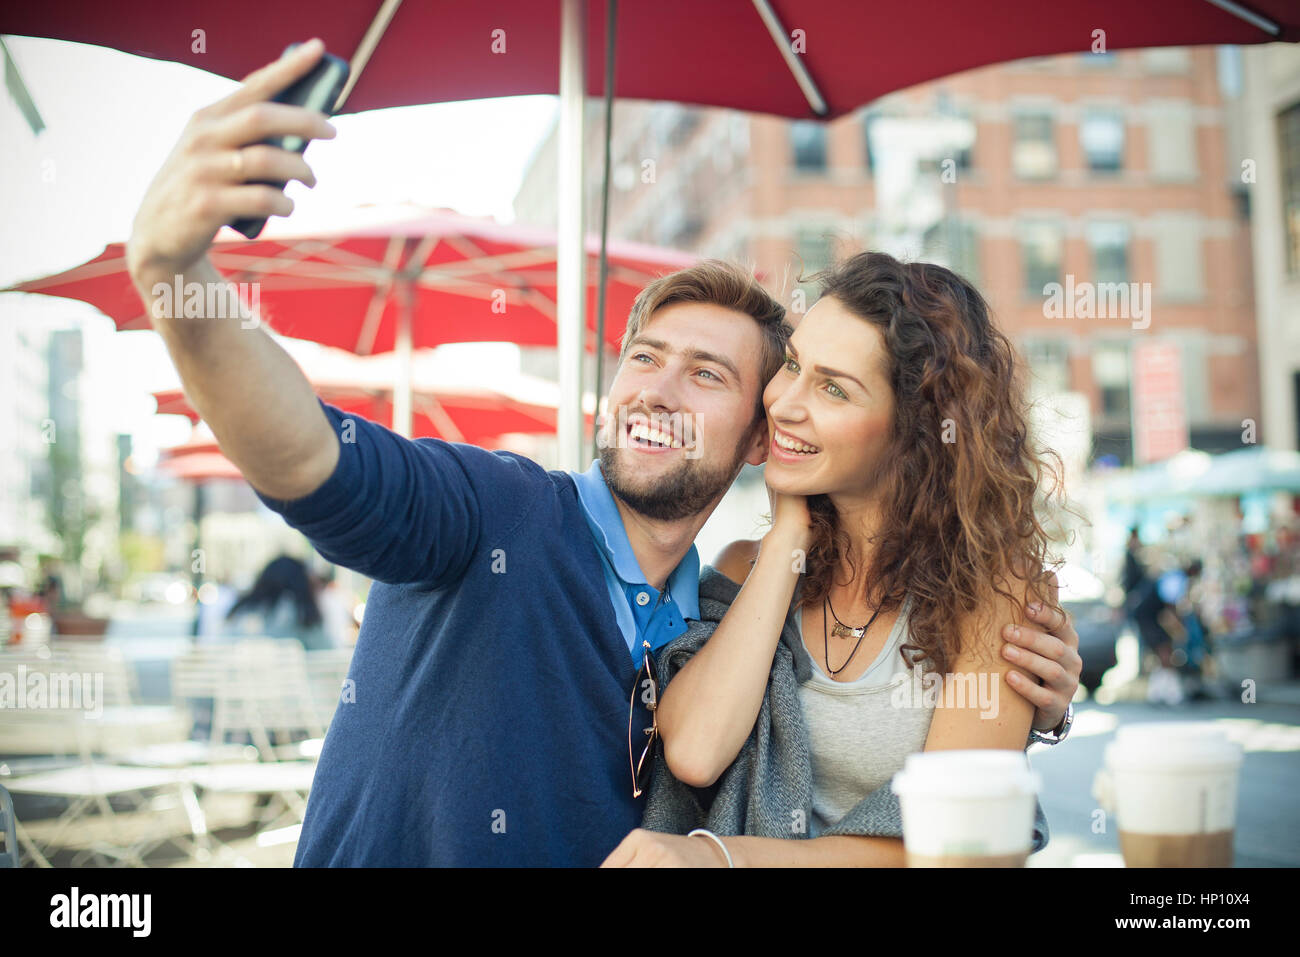 Couple posing for a selfie at outdoor cafe Stock Photo